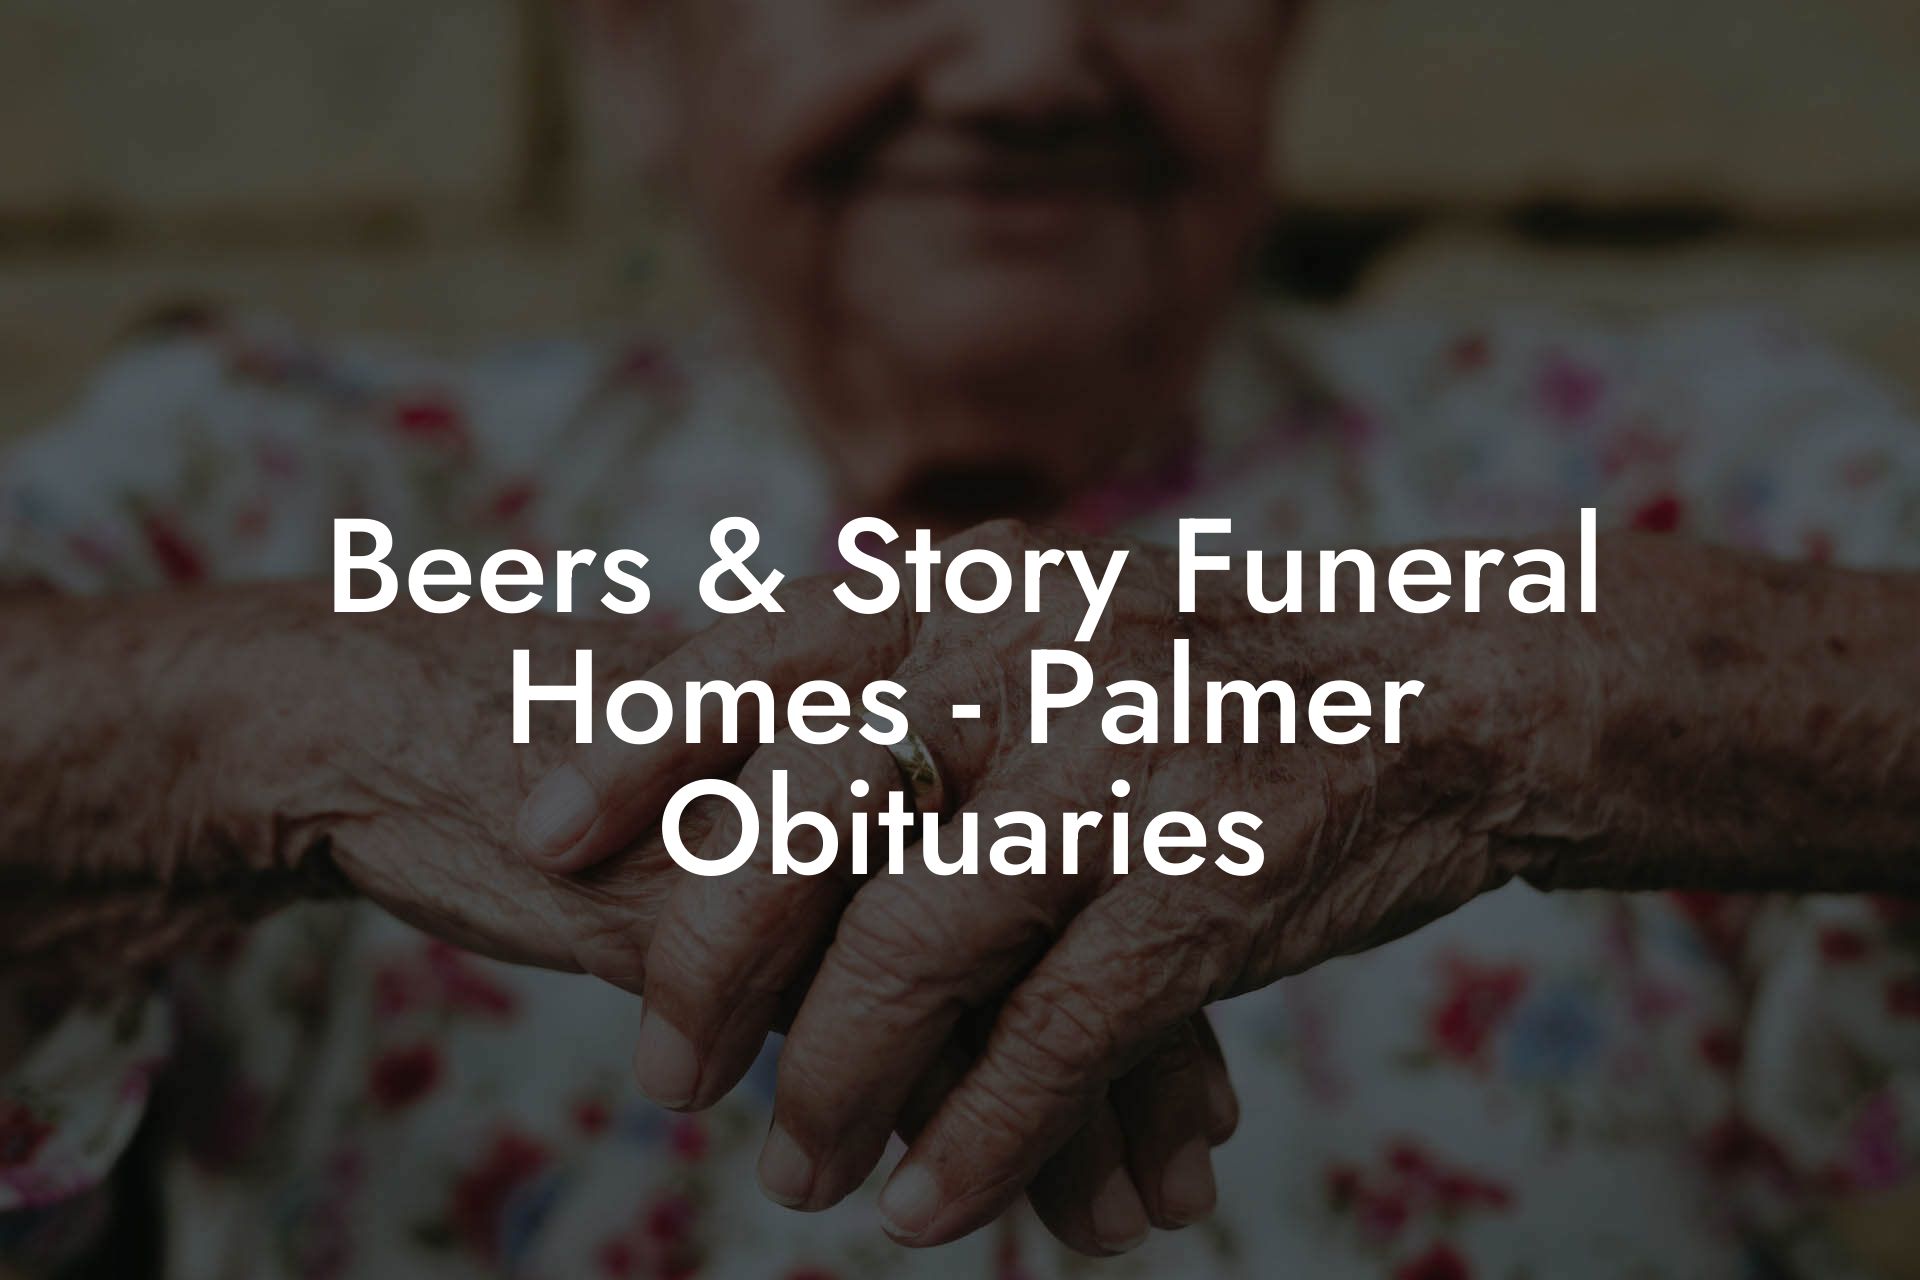 Beers & Story Funeral Homes - Palmer Obituaries